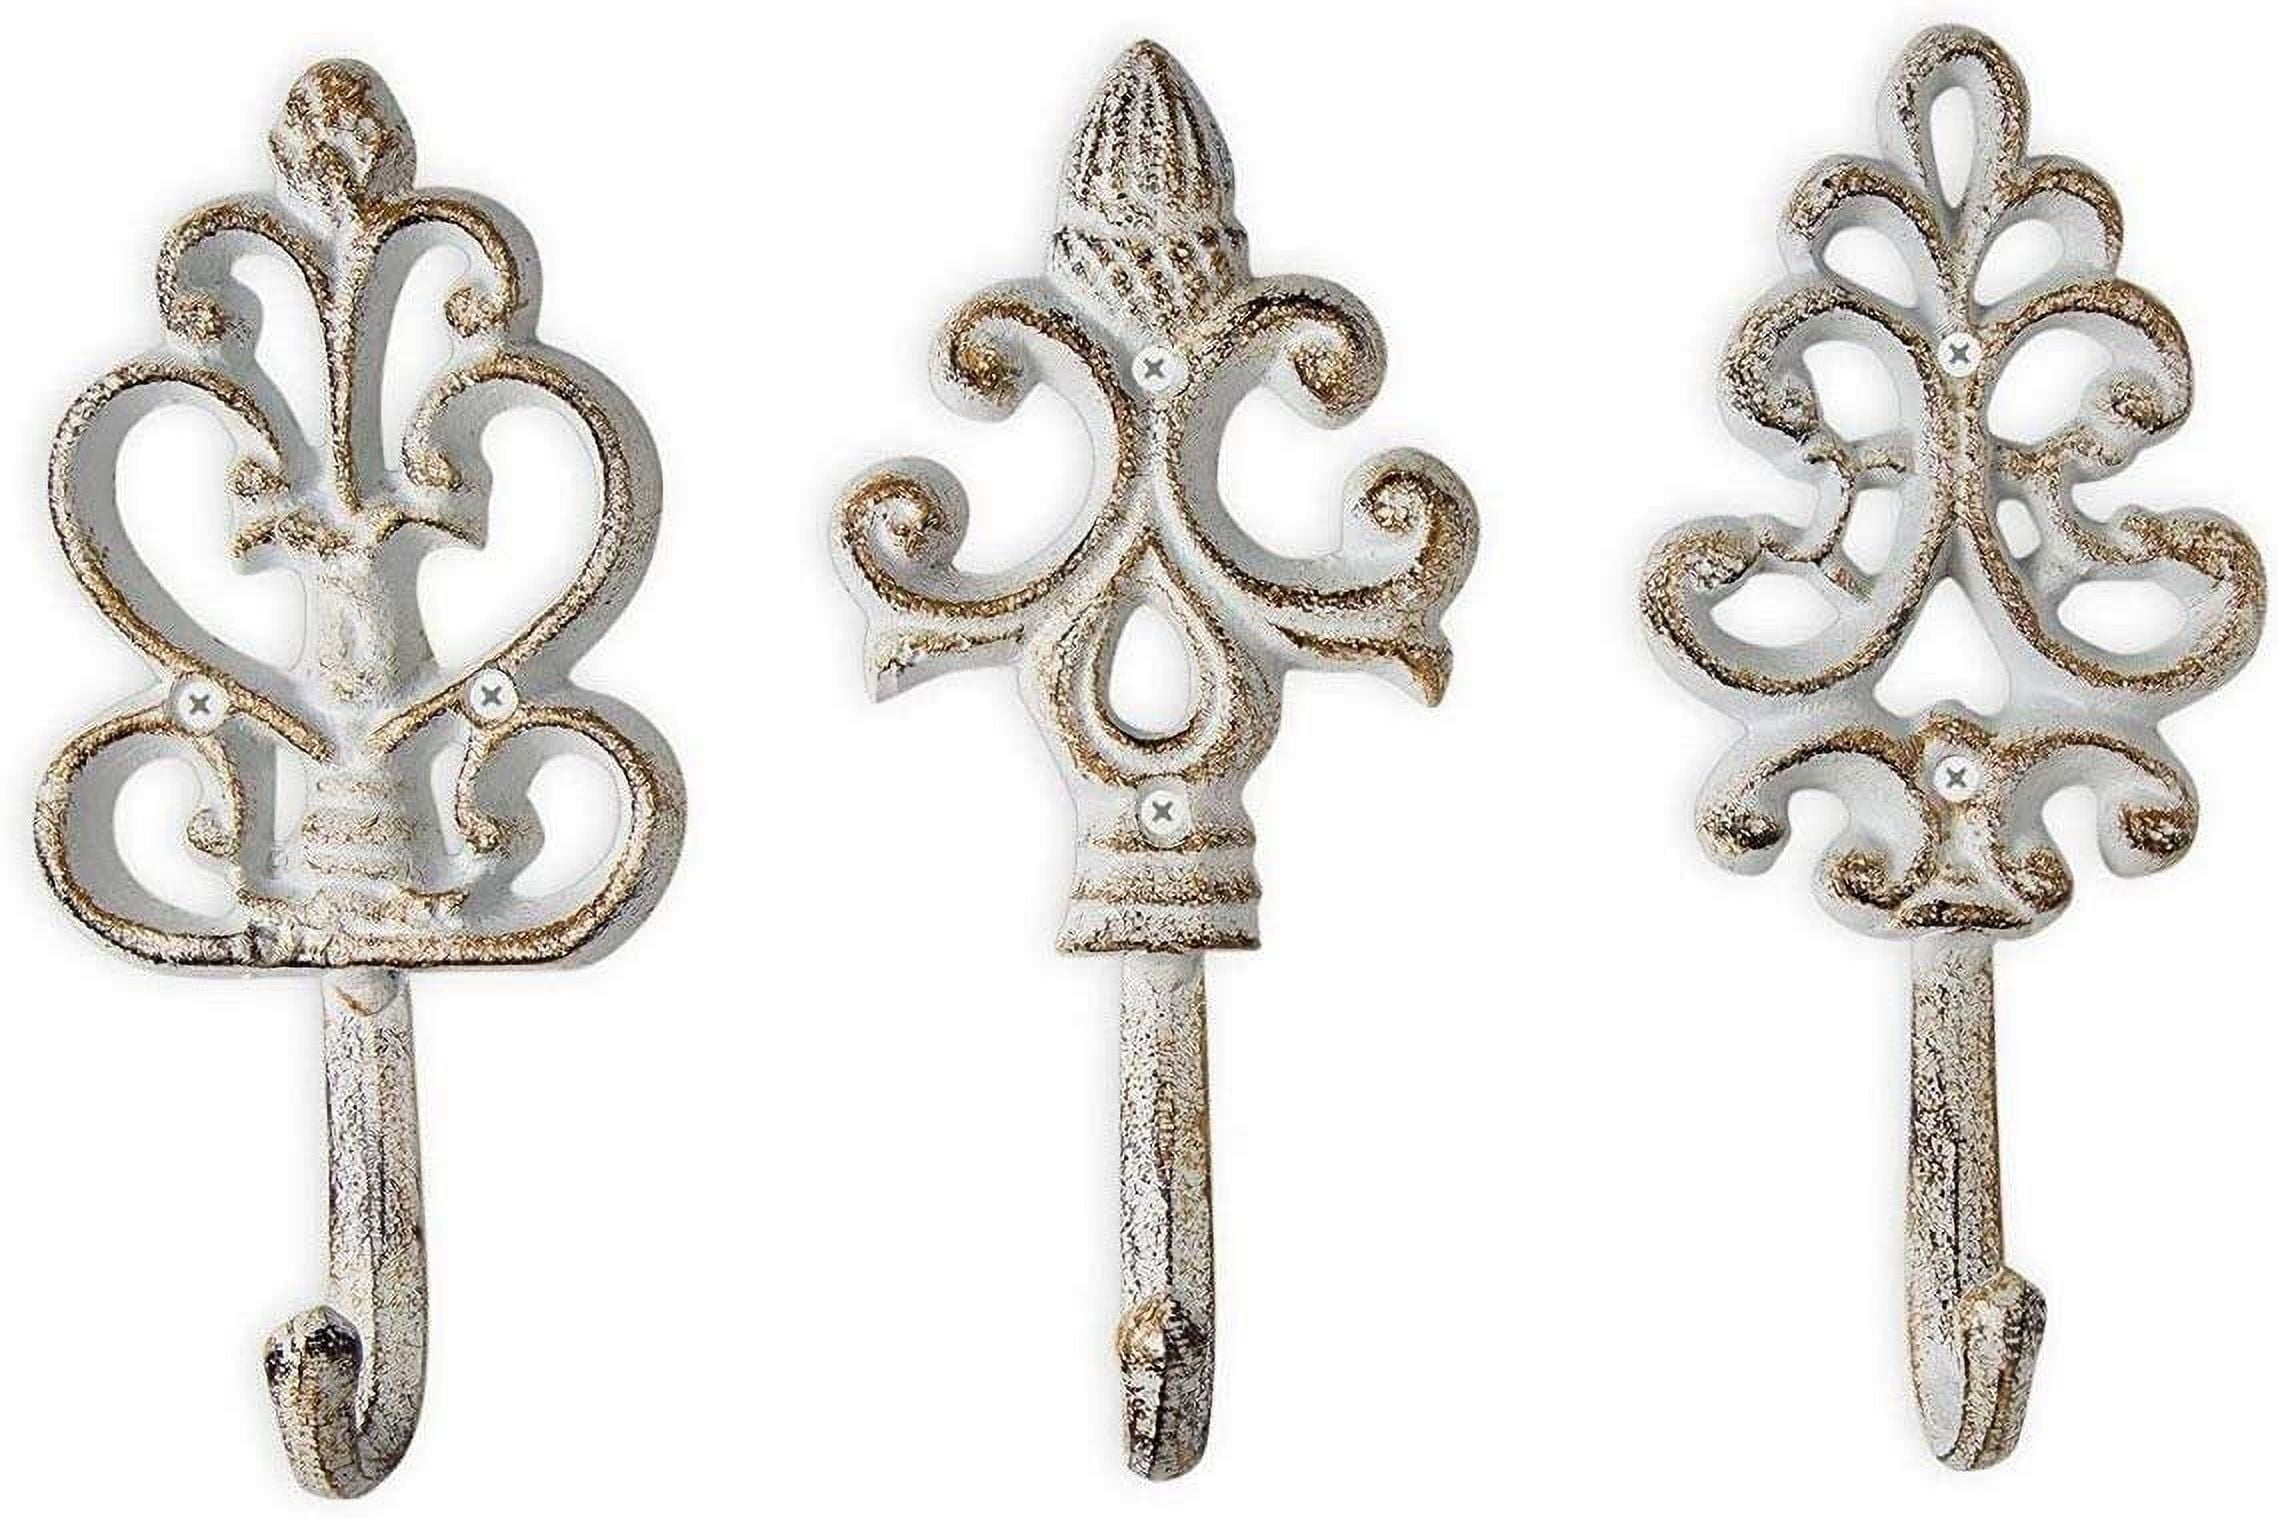 Shabby Chic Cast Iron Decorative Wall Hooks - Rustic - Antique